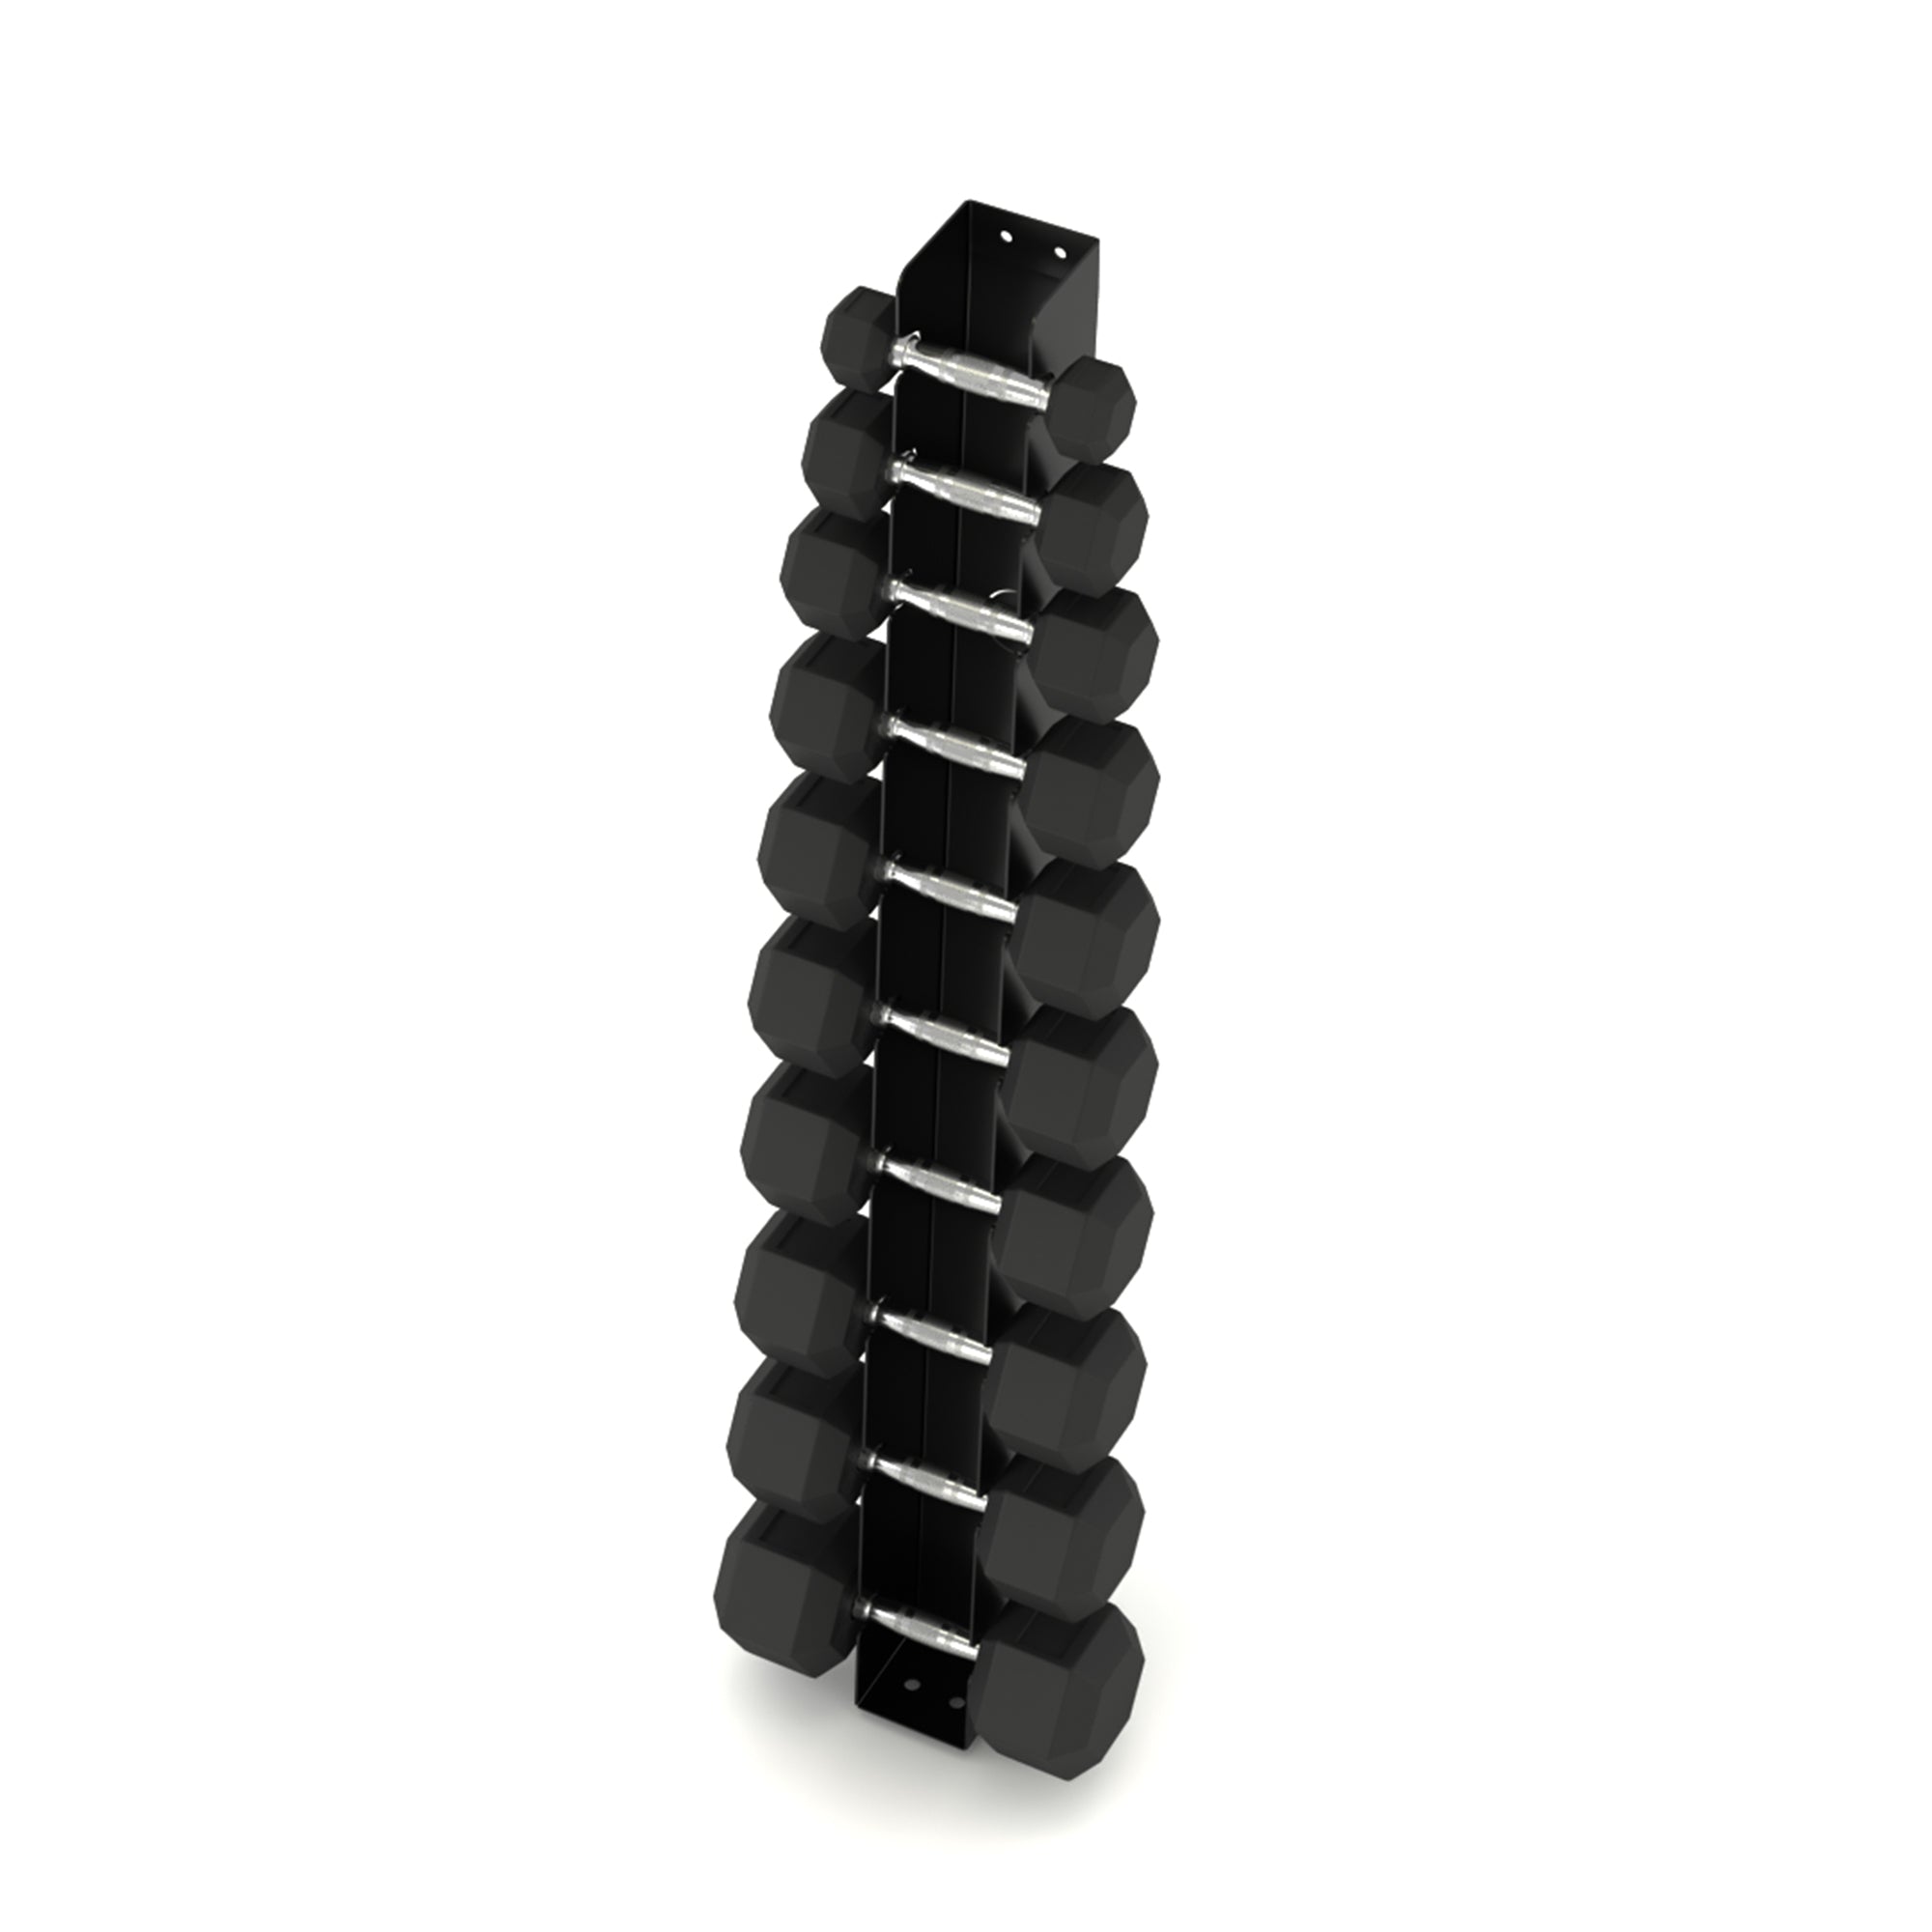 Wall Mounted Angled Dumbbell Storage Rack (Up to 25kg)